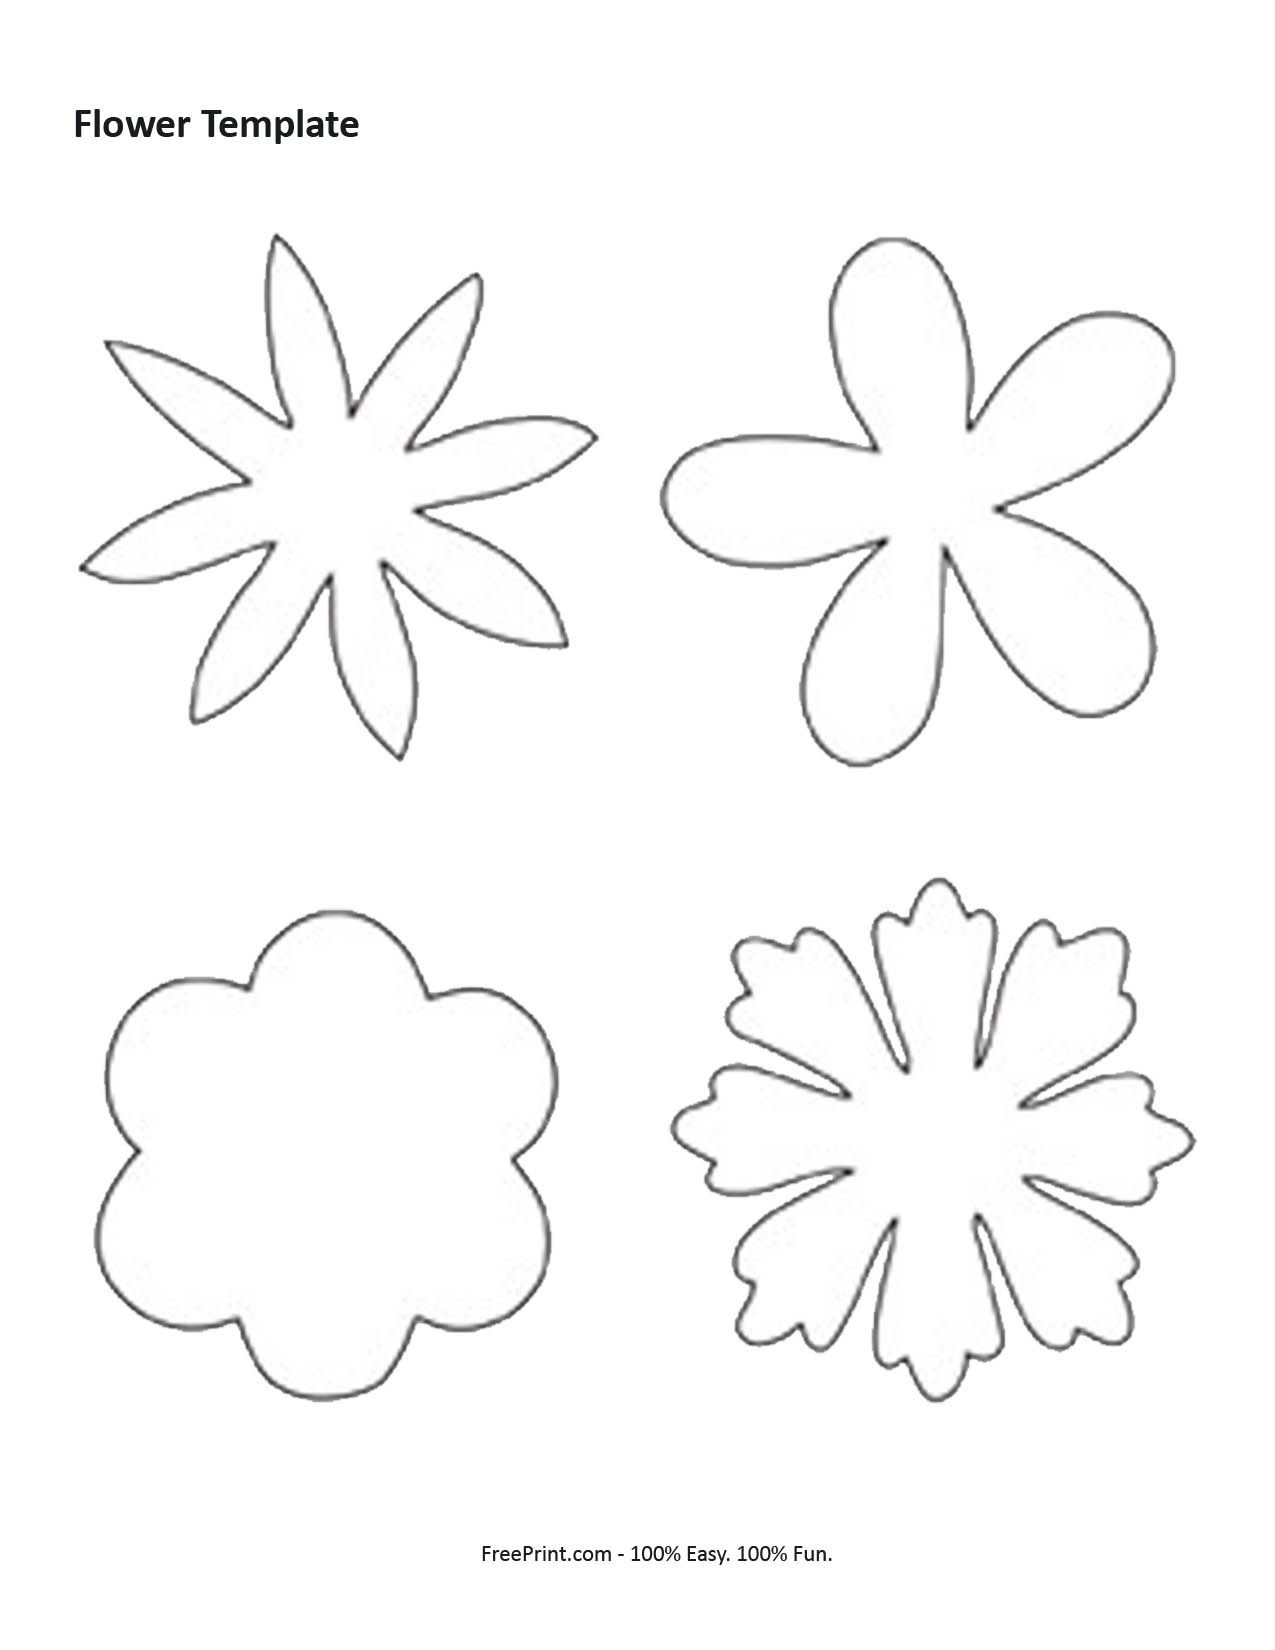 cut-out-flower-shapes-clip-art-library